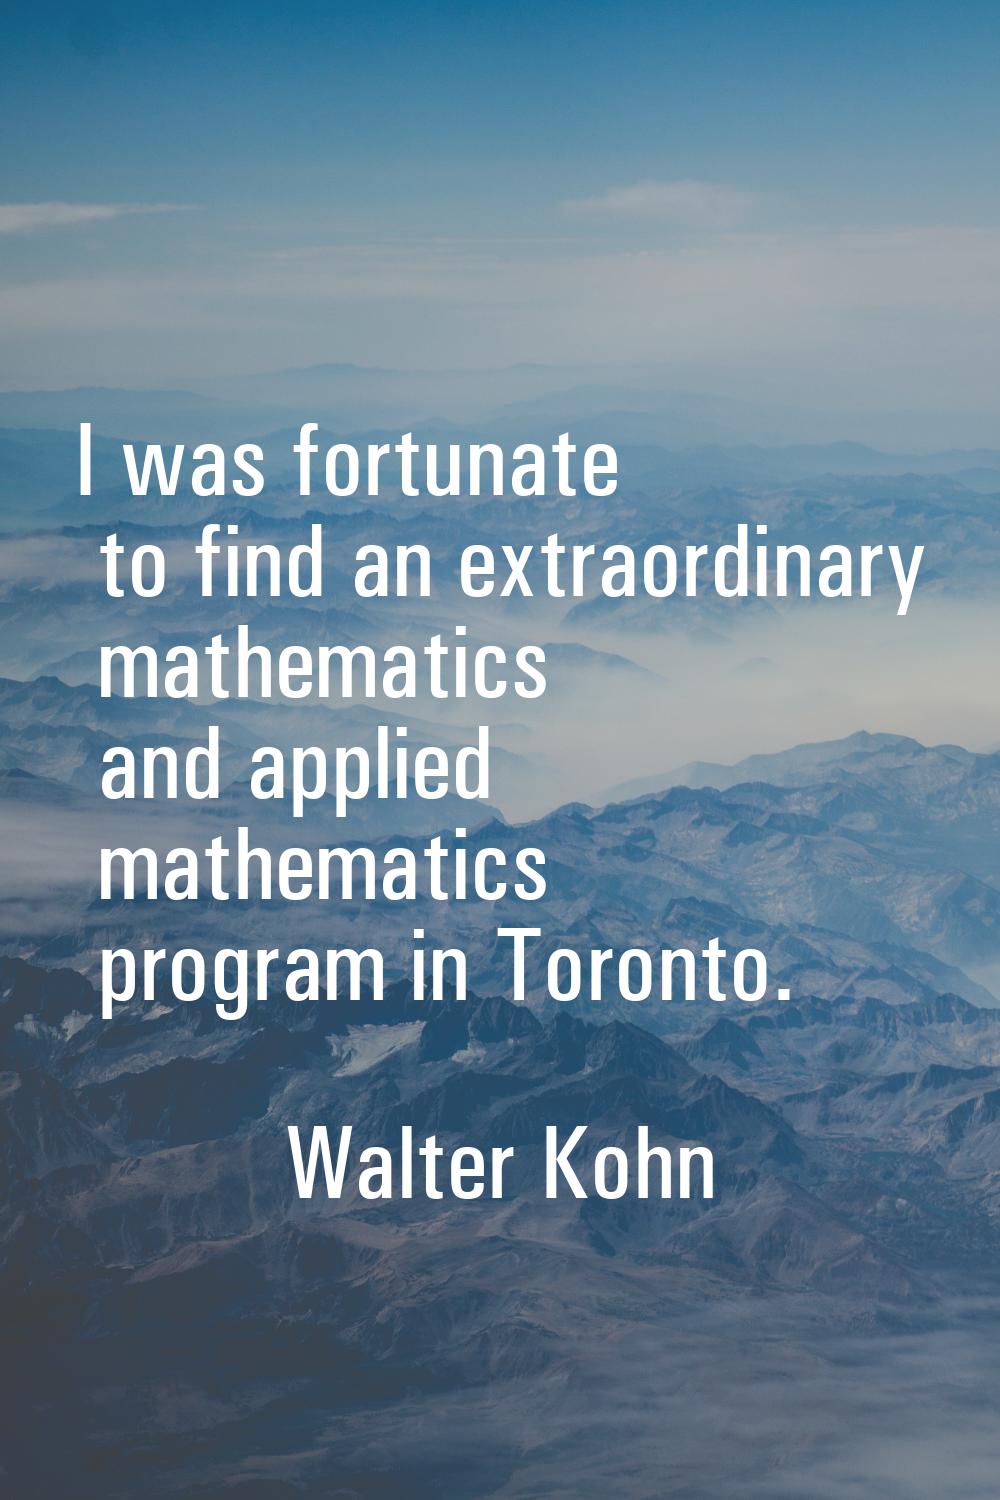 I was fortunate to find an extraordinary mathematics and applied mathematics program in Toronto.